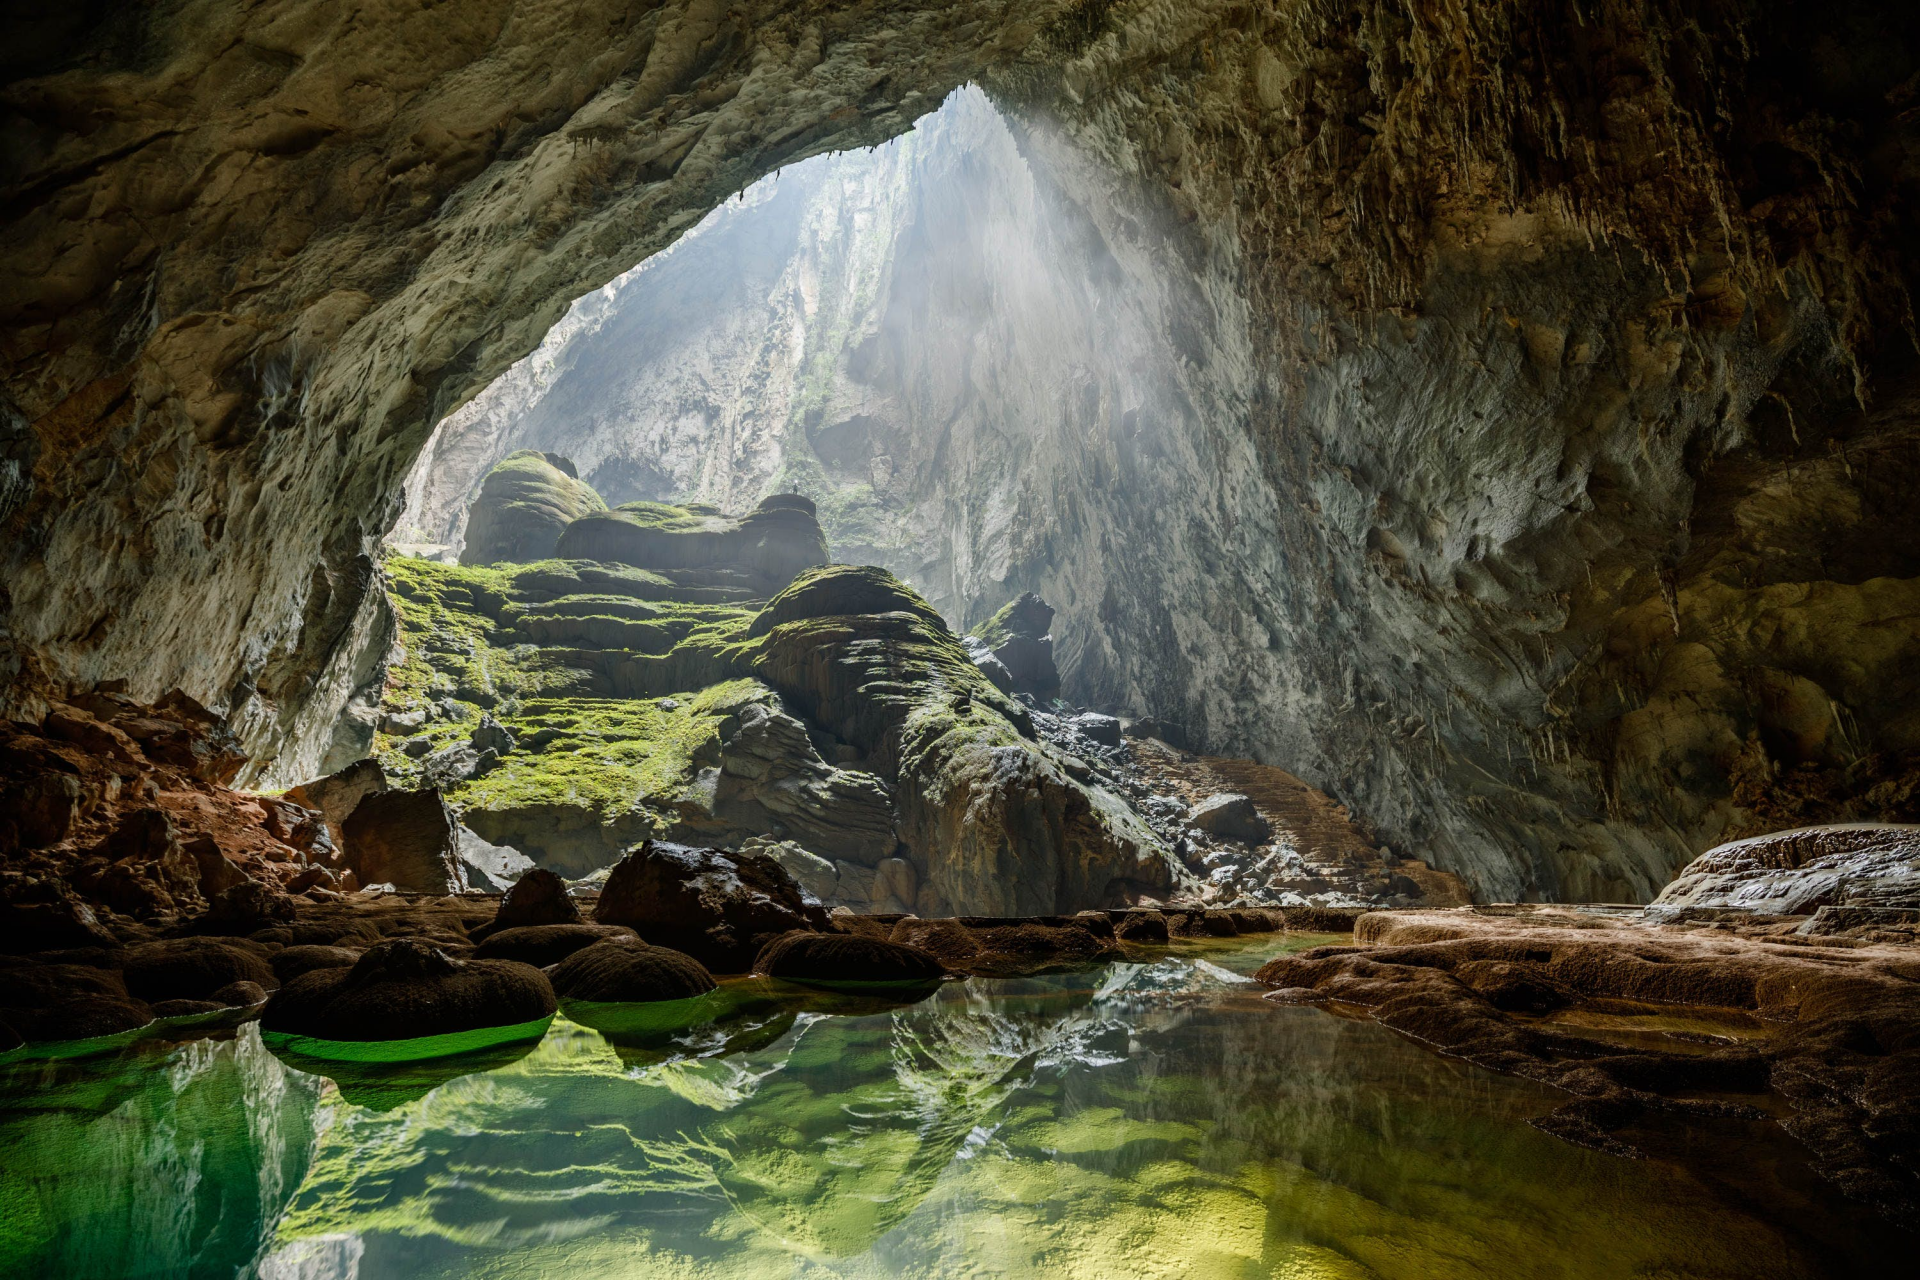 Tours to Son Doong, world’s largest cave in Vietnam fully booked this year